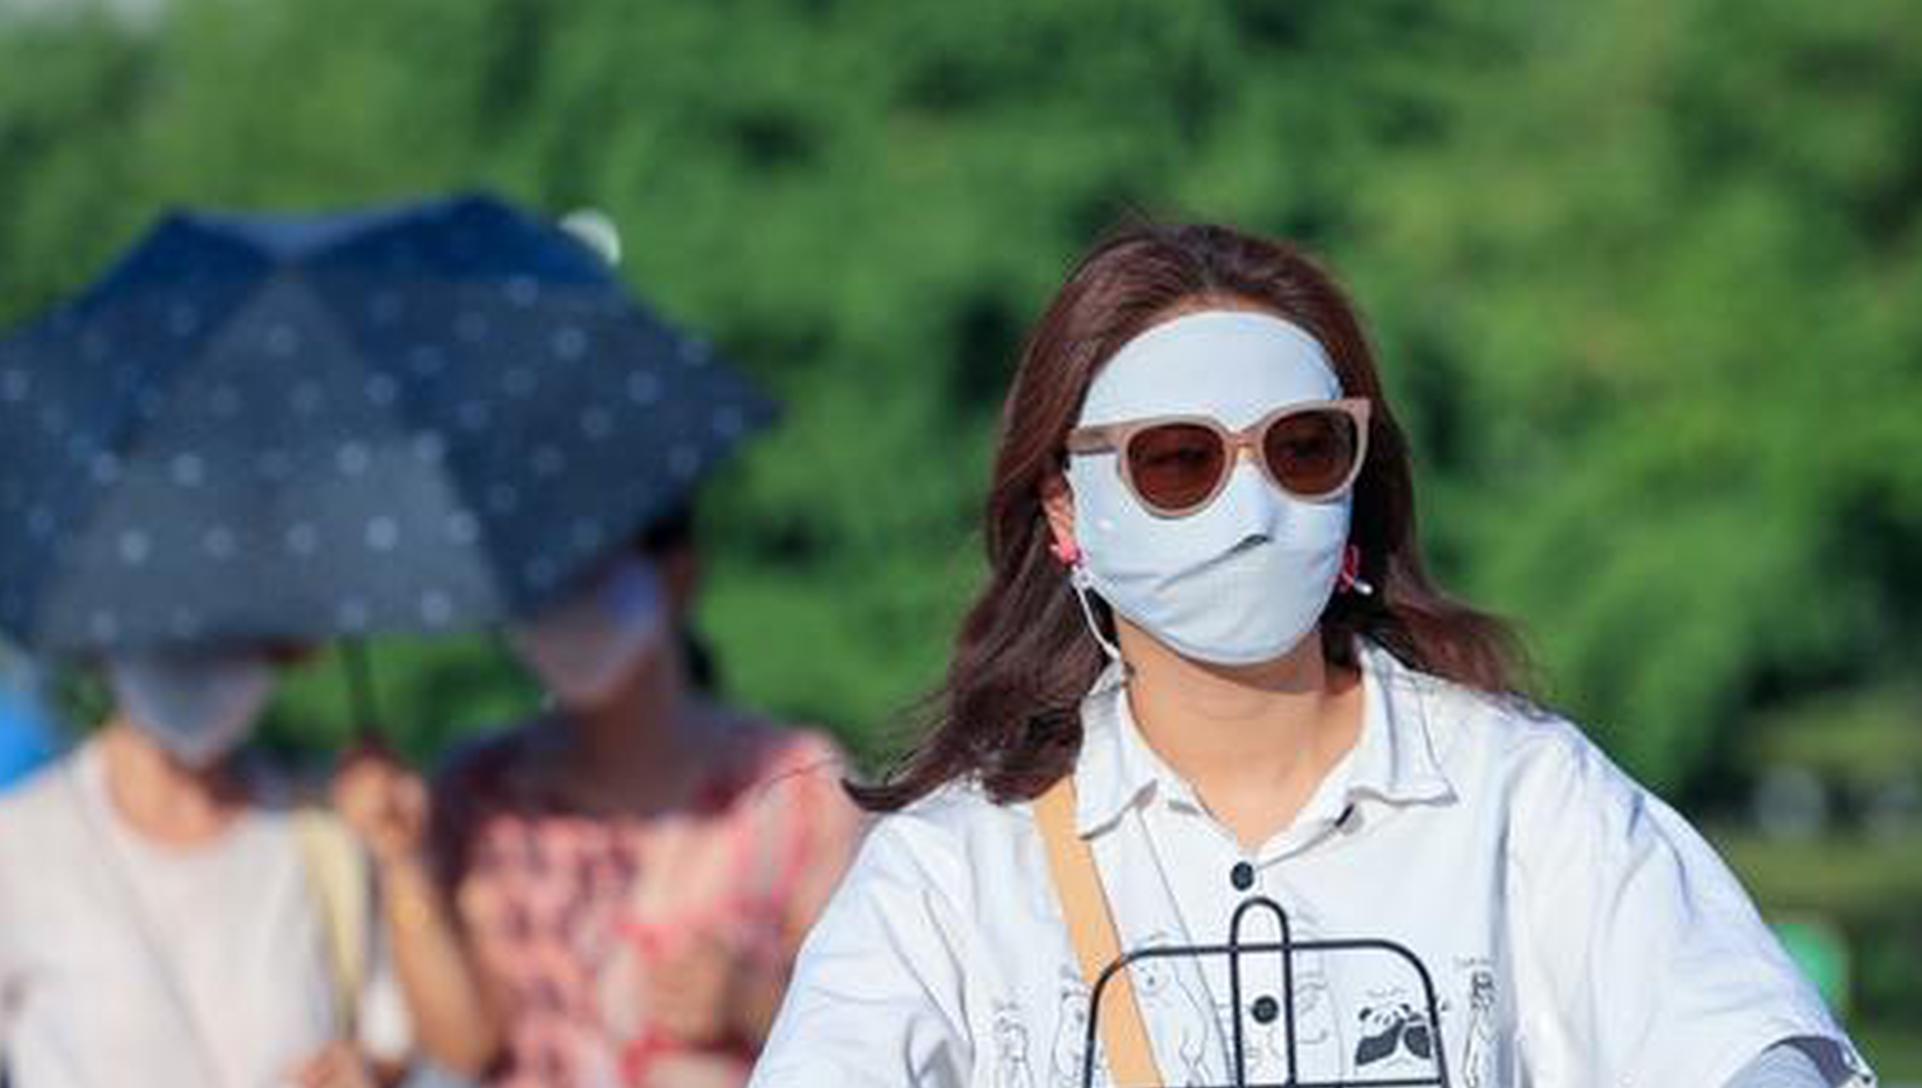 Sun protection products on hot sale as heatwave continues in China